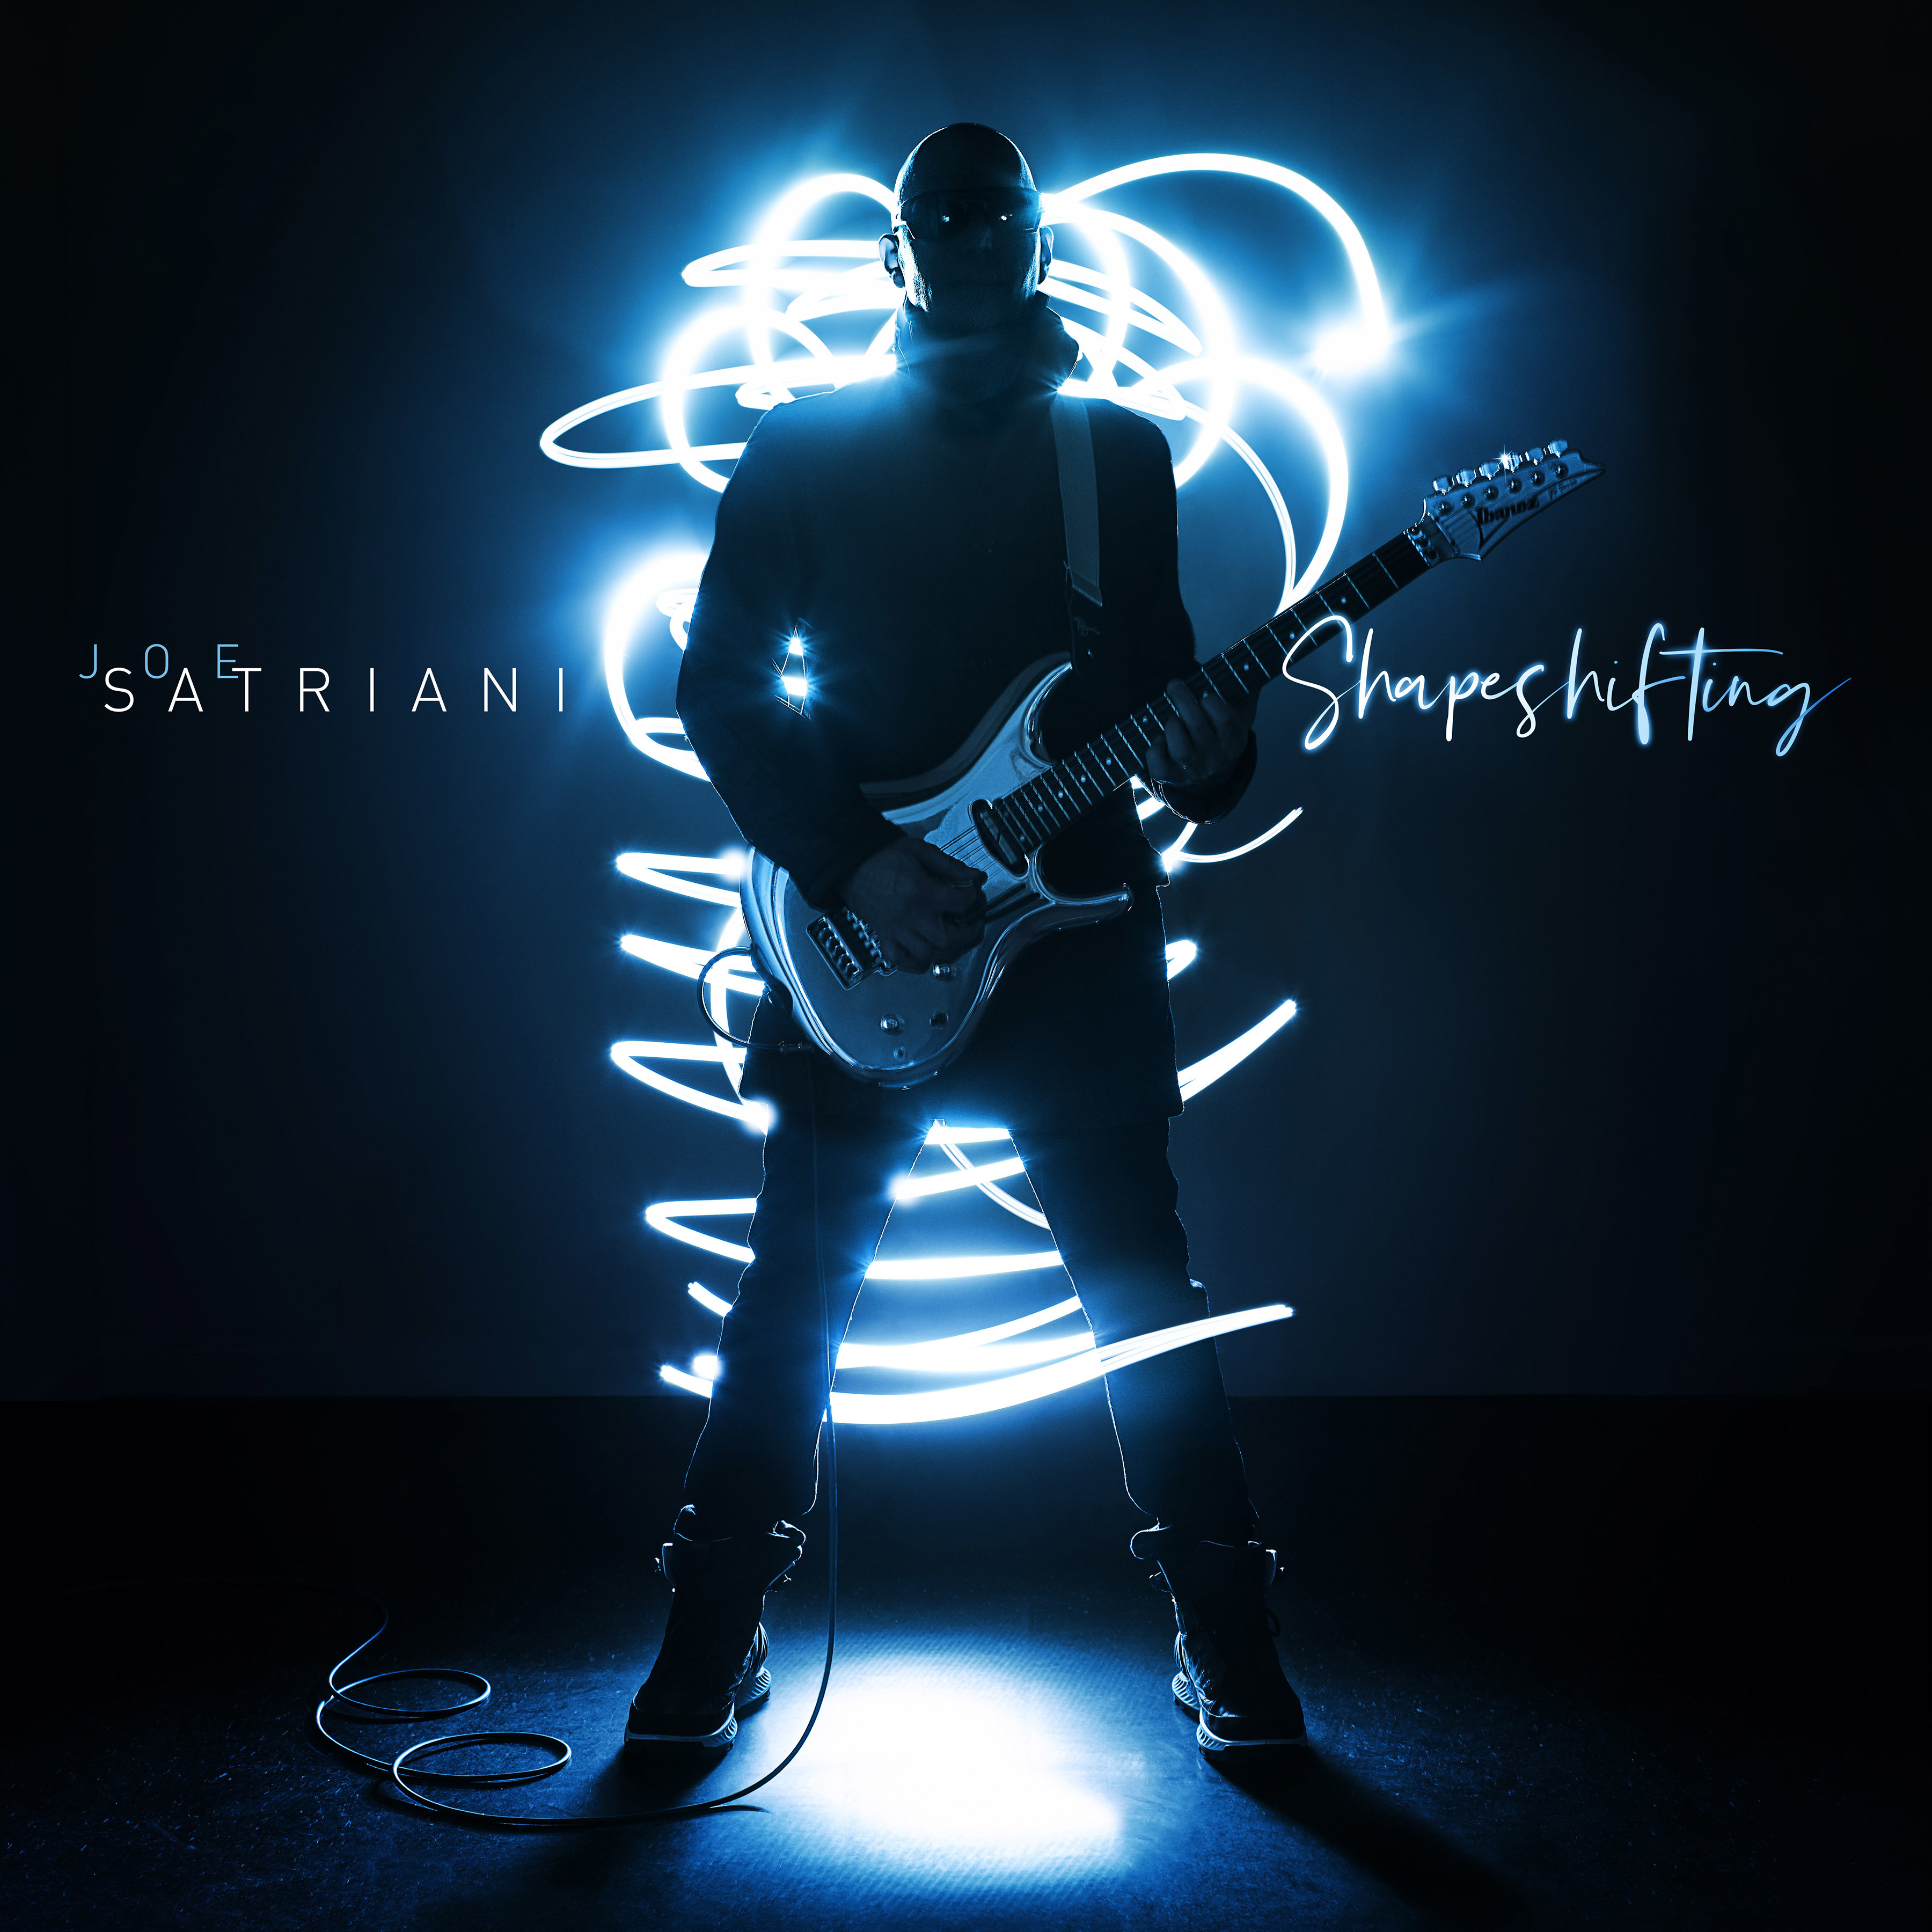 Joe Satriani's "Shapeshifting" Out Today - Worldwide Fan Q&A Event on Monday April 13th